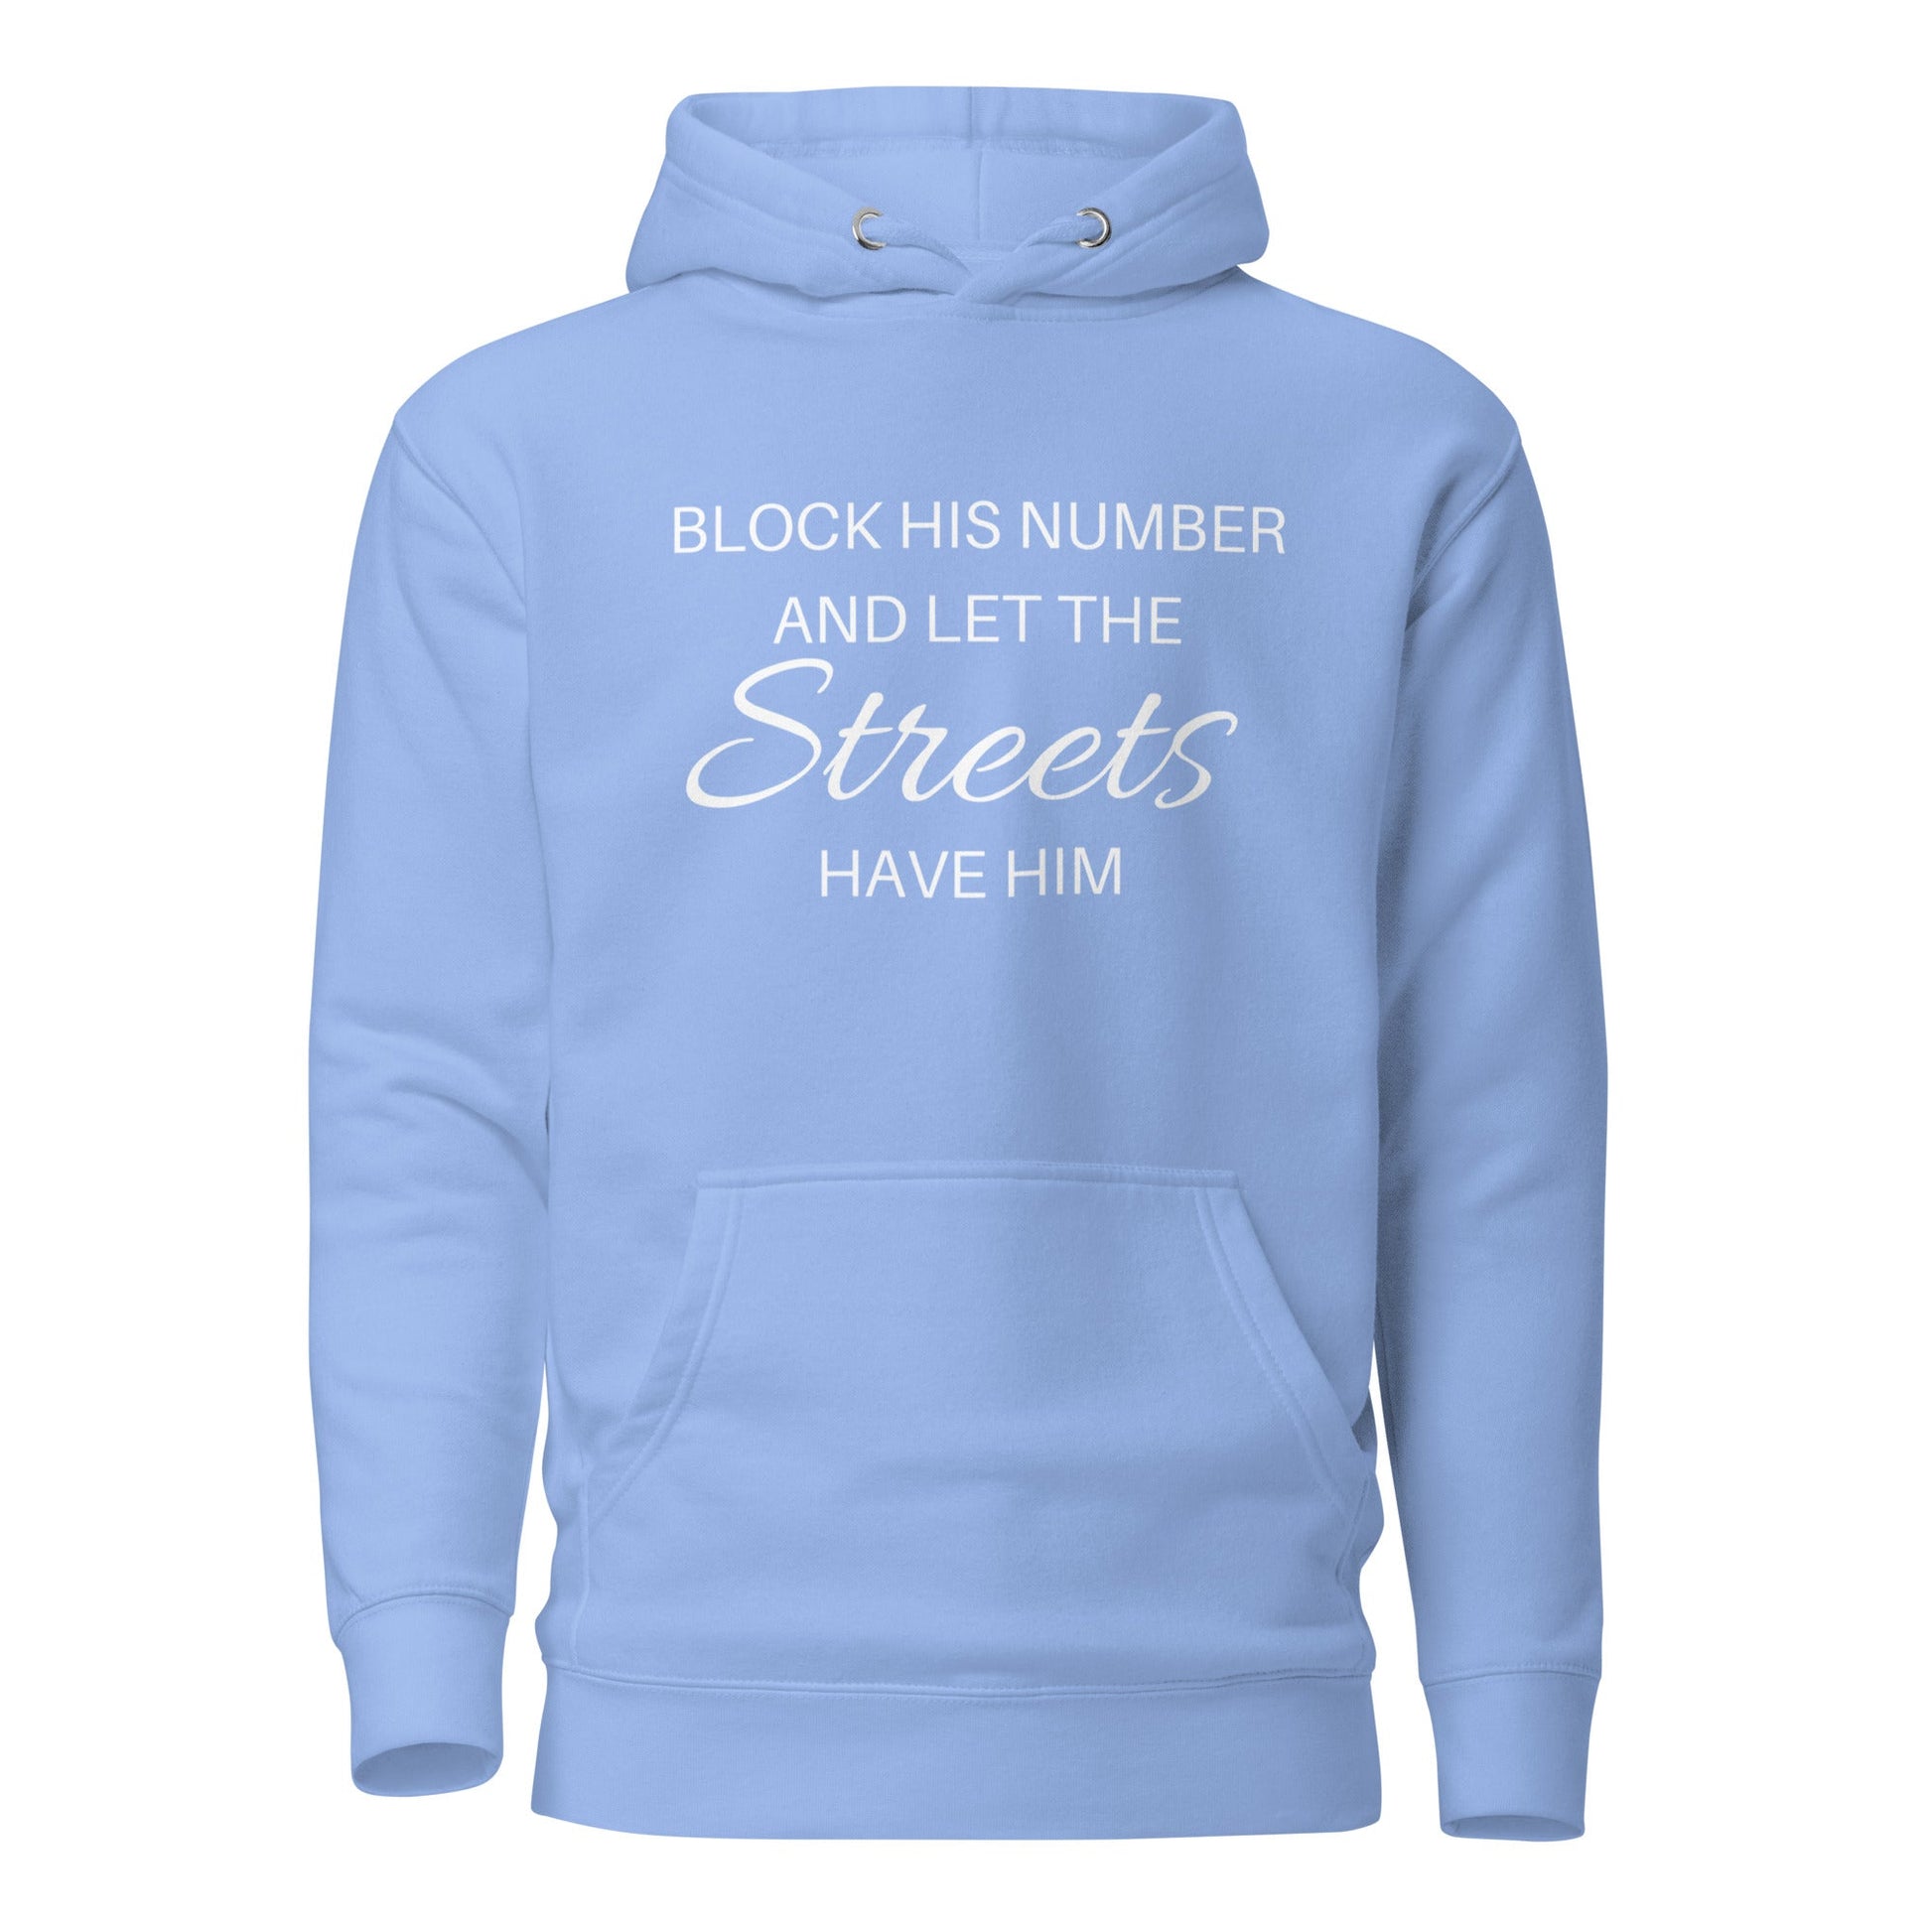 Block his number and let the streets have him Unisex Hoodie - Catch This Tea Shirts